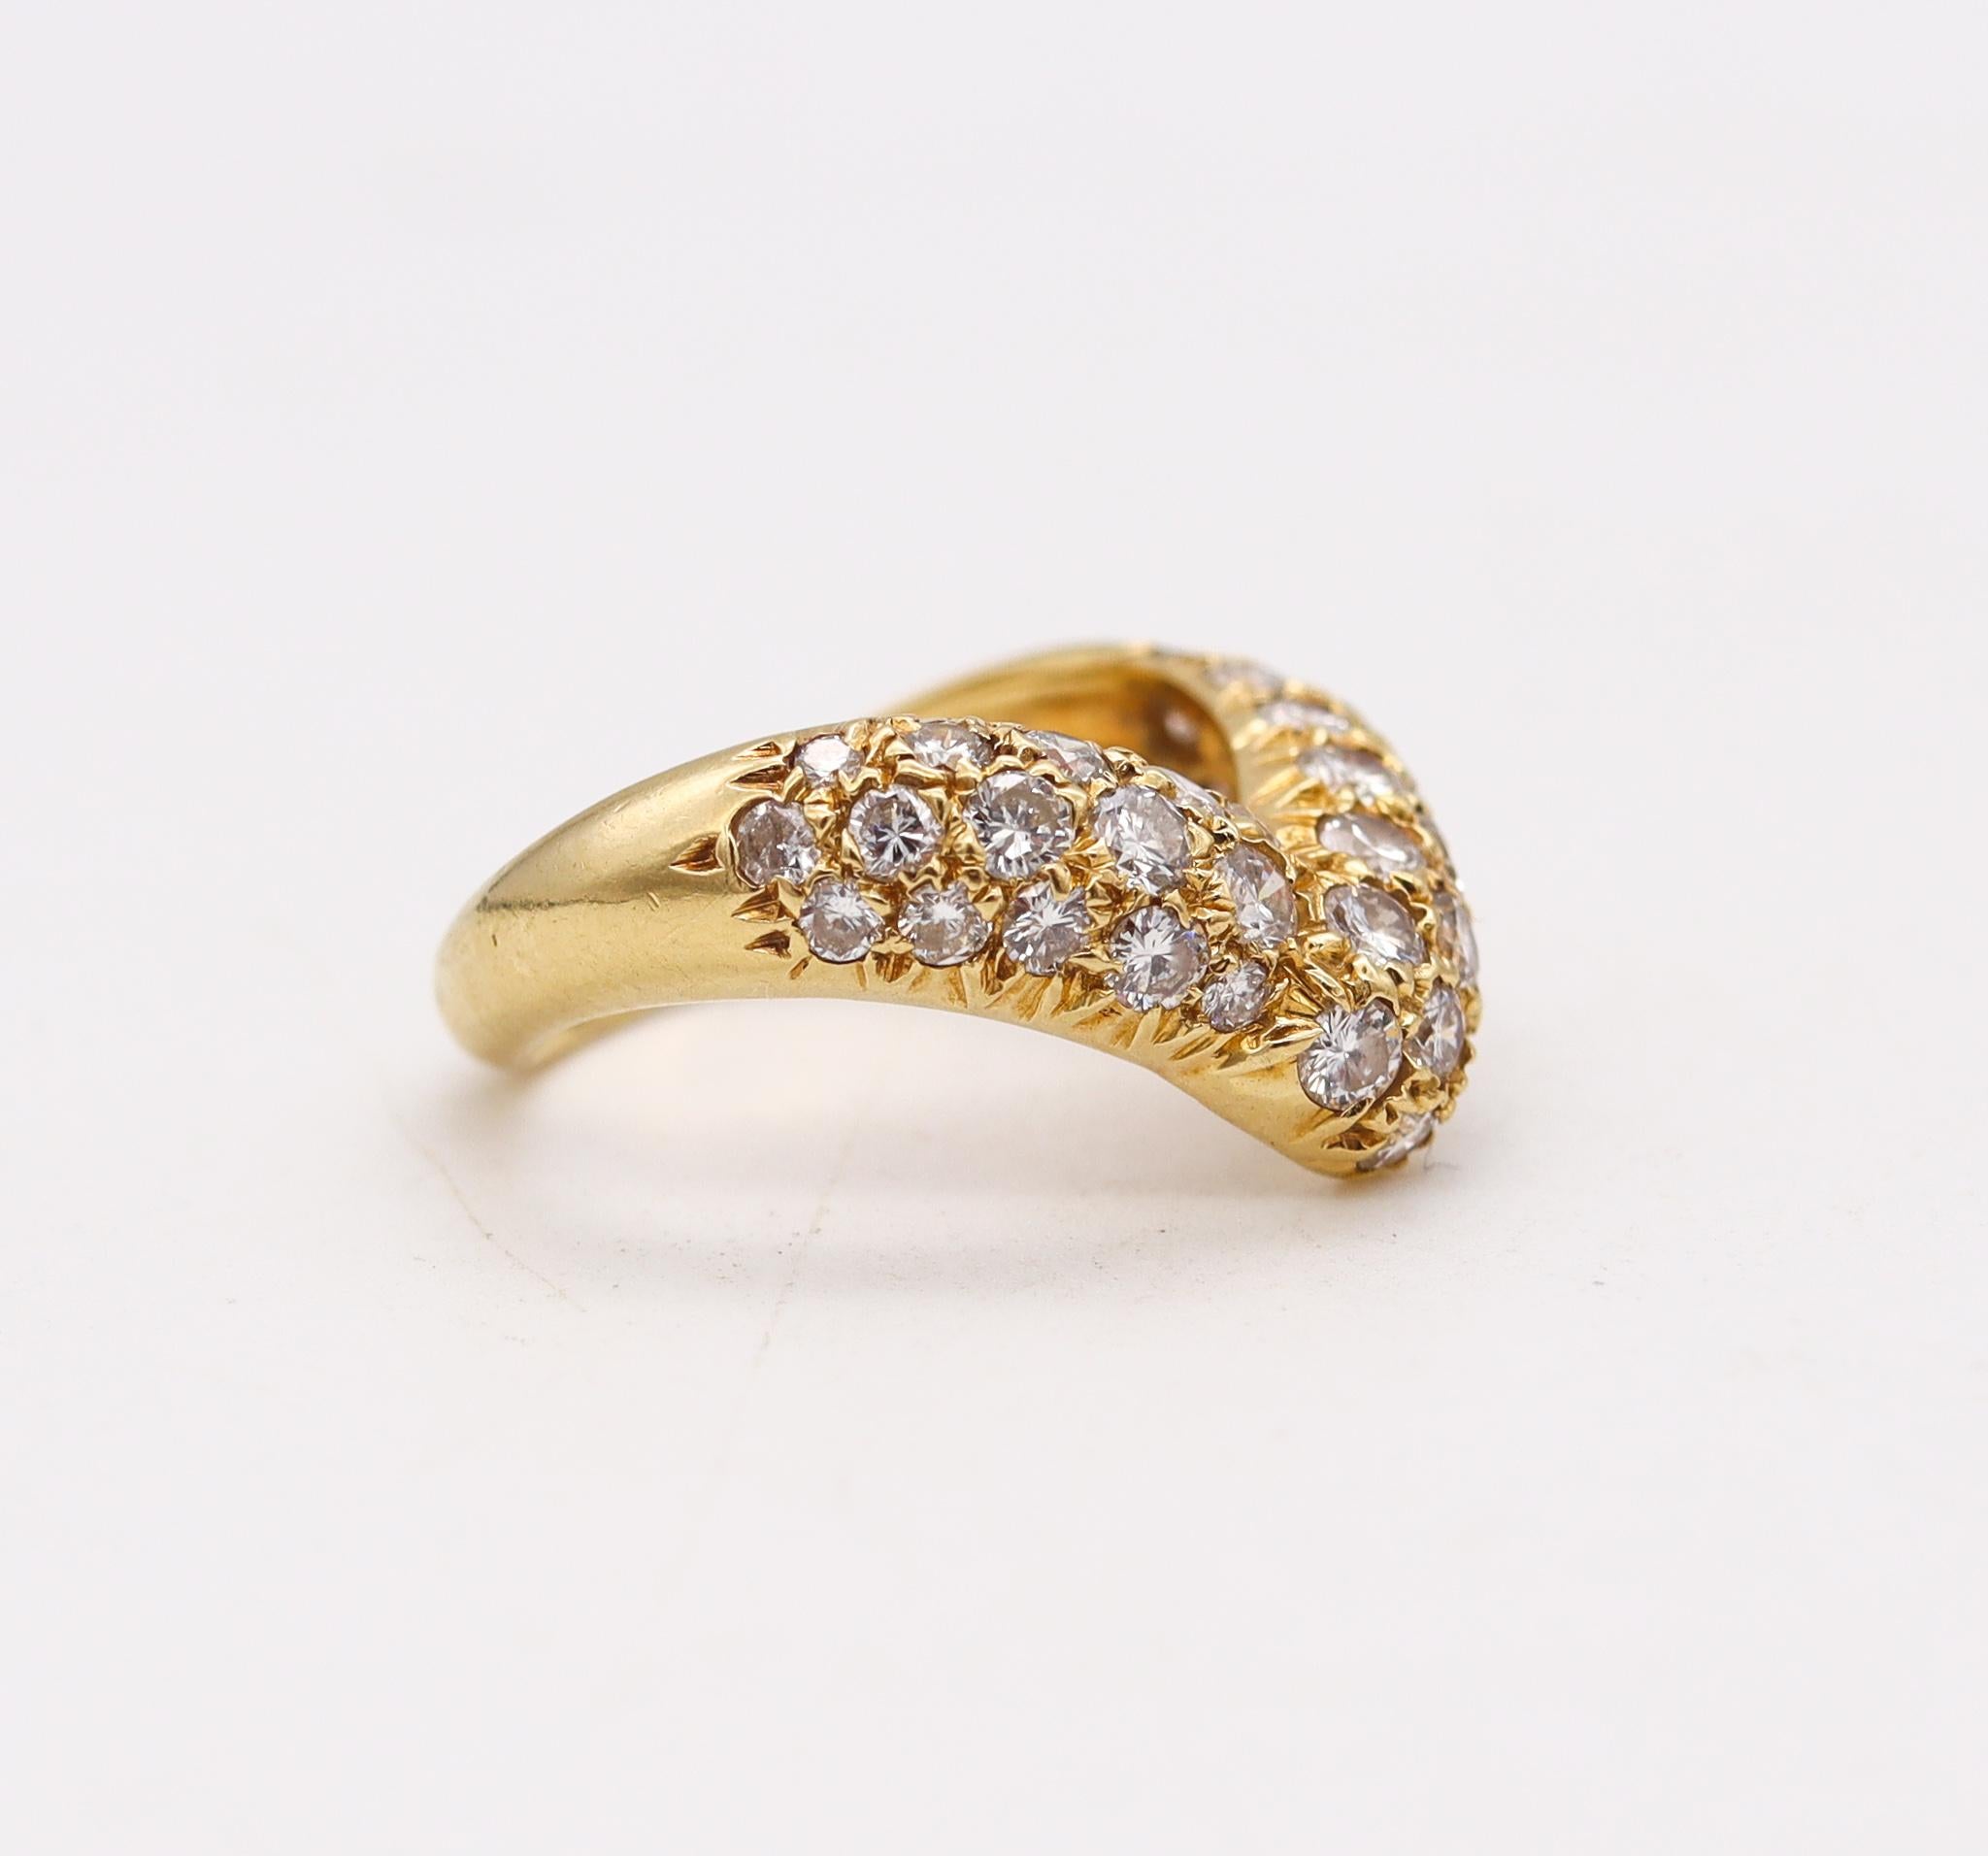 Modernist Van Cleef & Arpels 1976 Paris Ring in 18Kt Yellow Gold with 1.06 Cts Diamonds